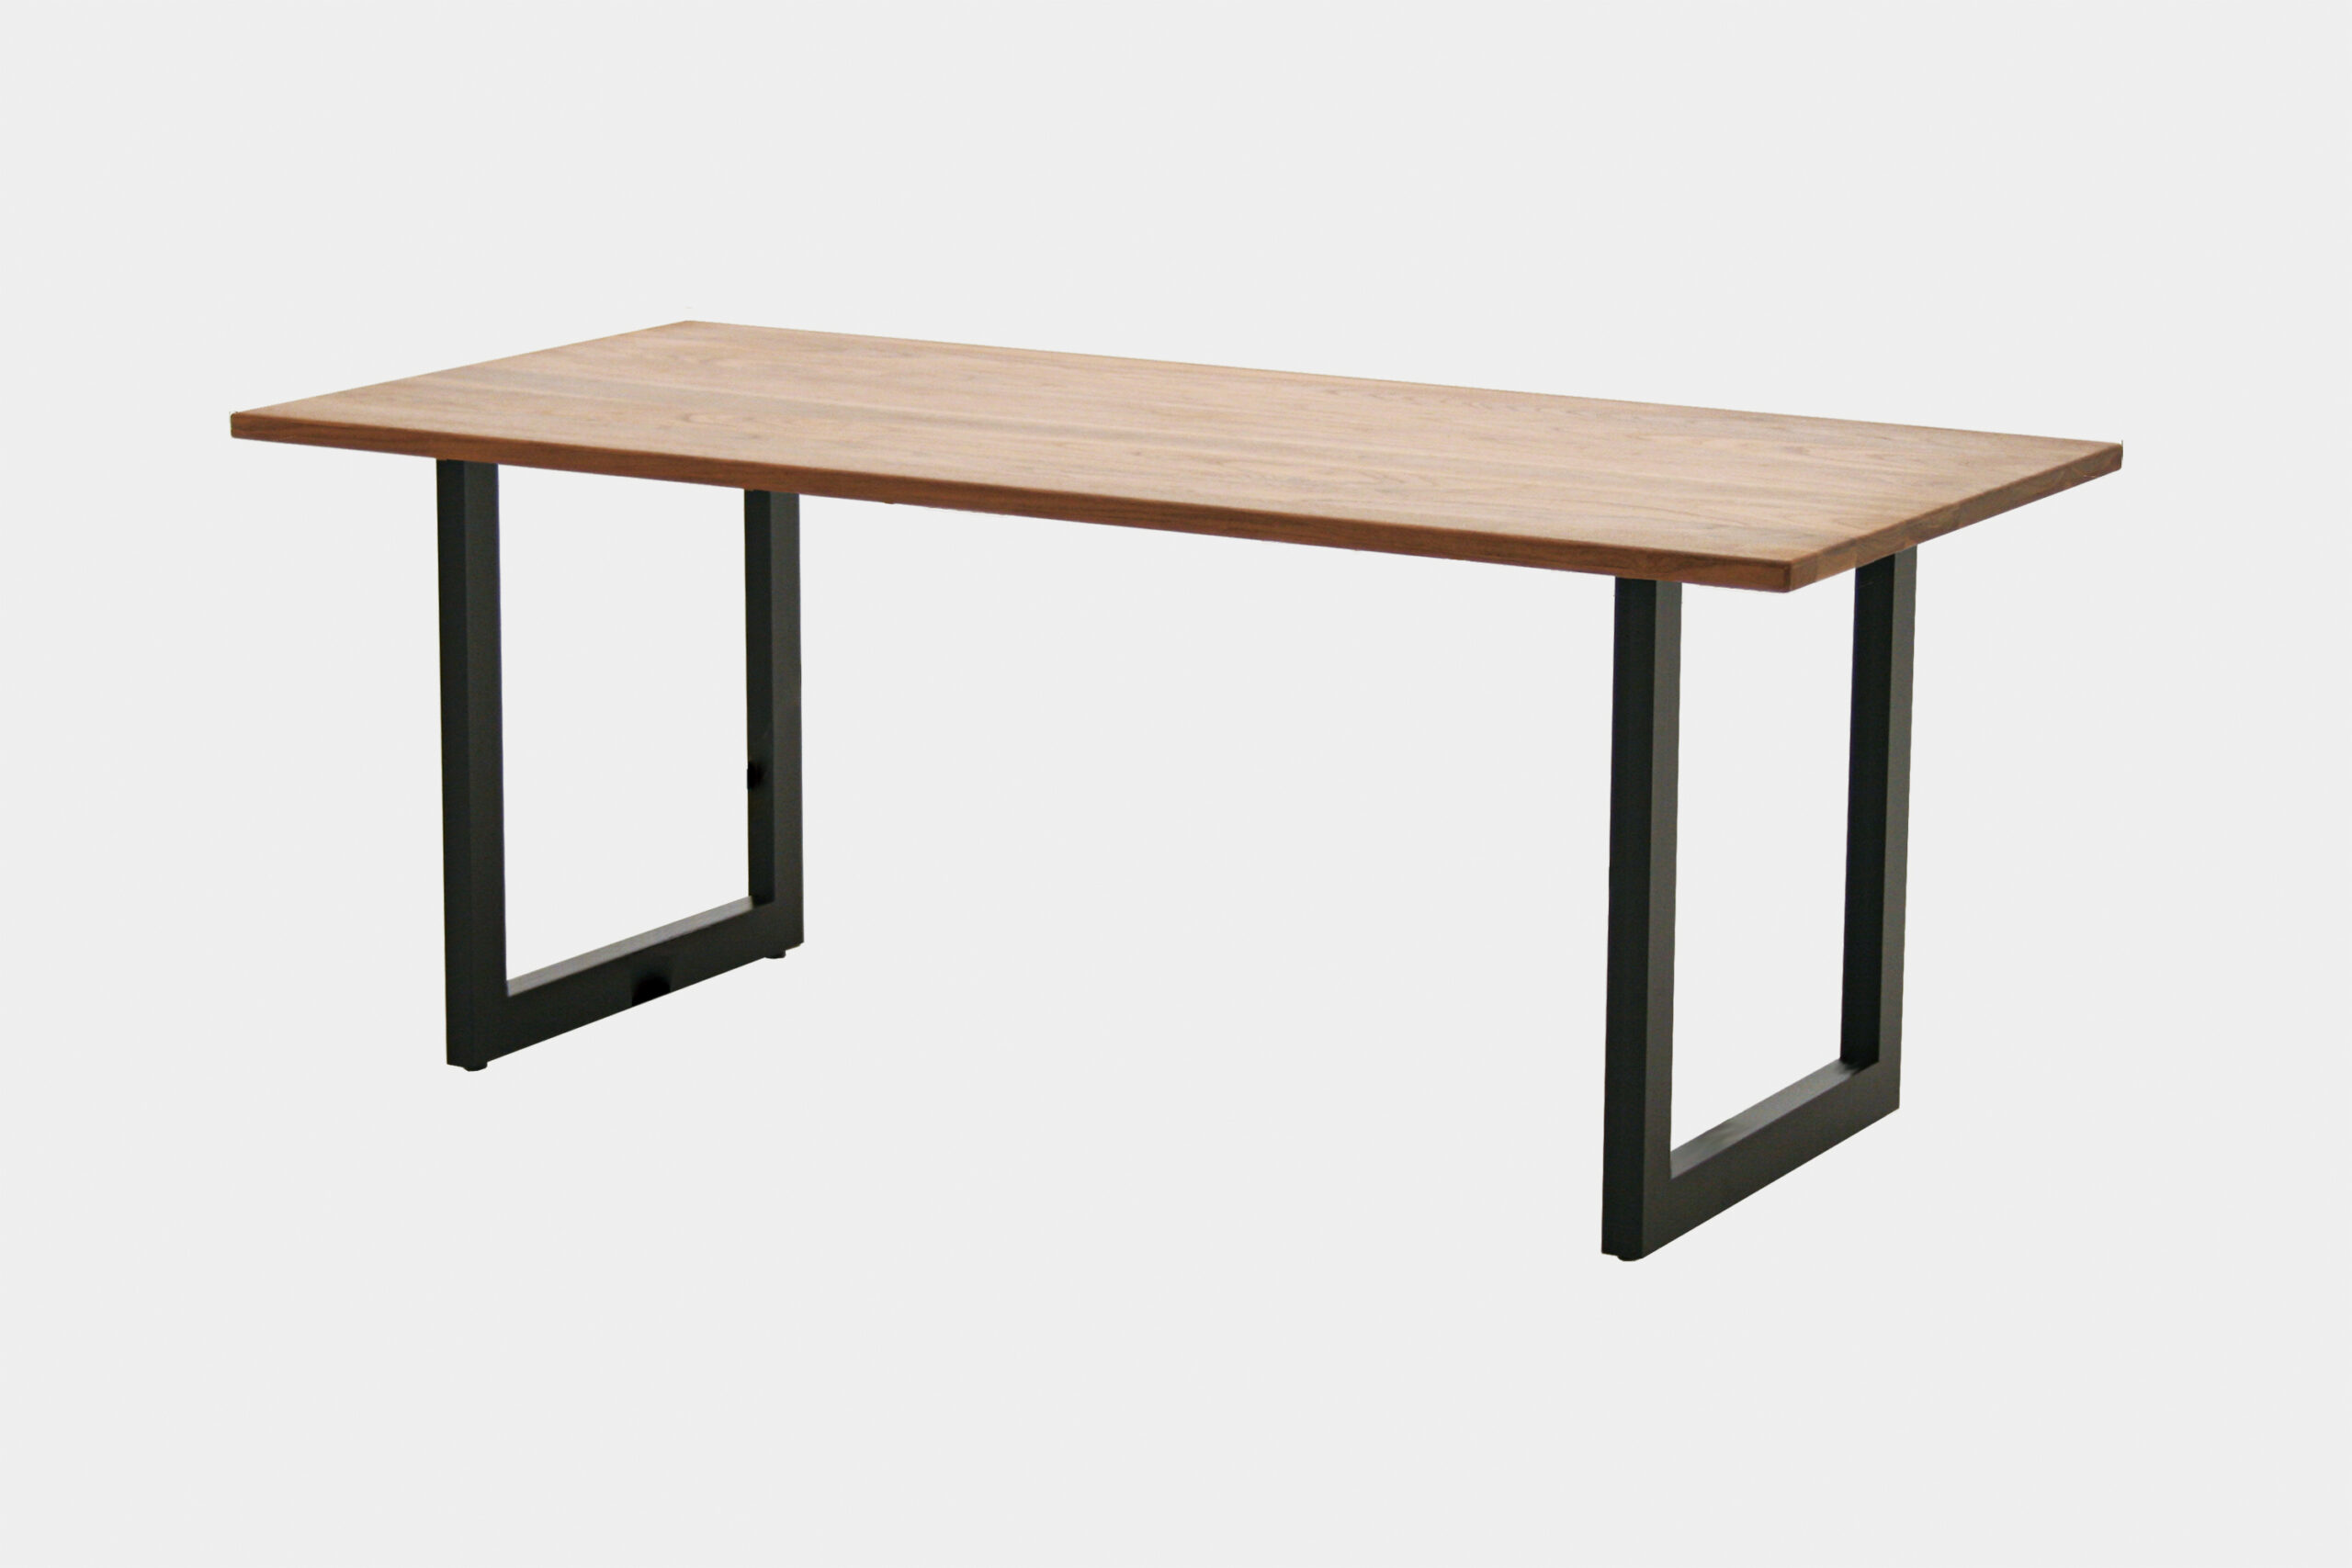 REAL Brick Dining Table DT614（リアル ブリック ダイニングテーブル DT614）